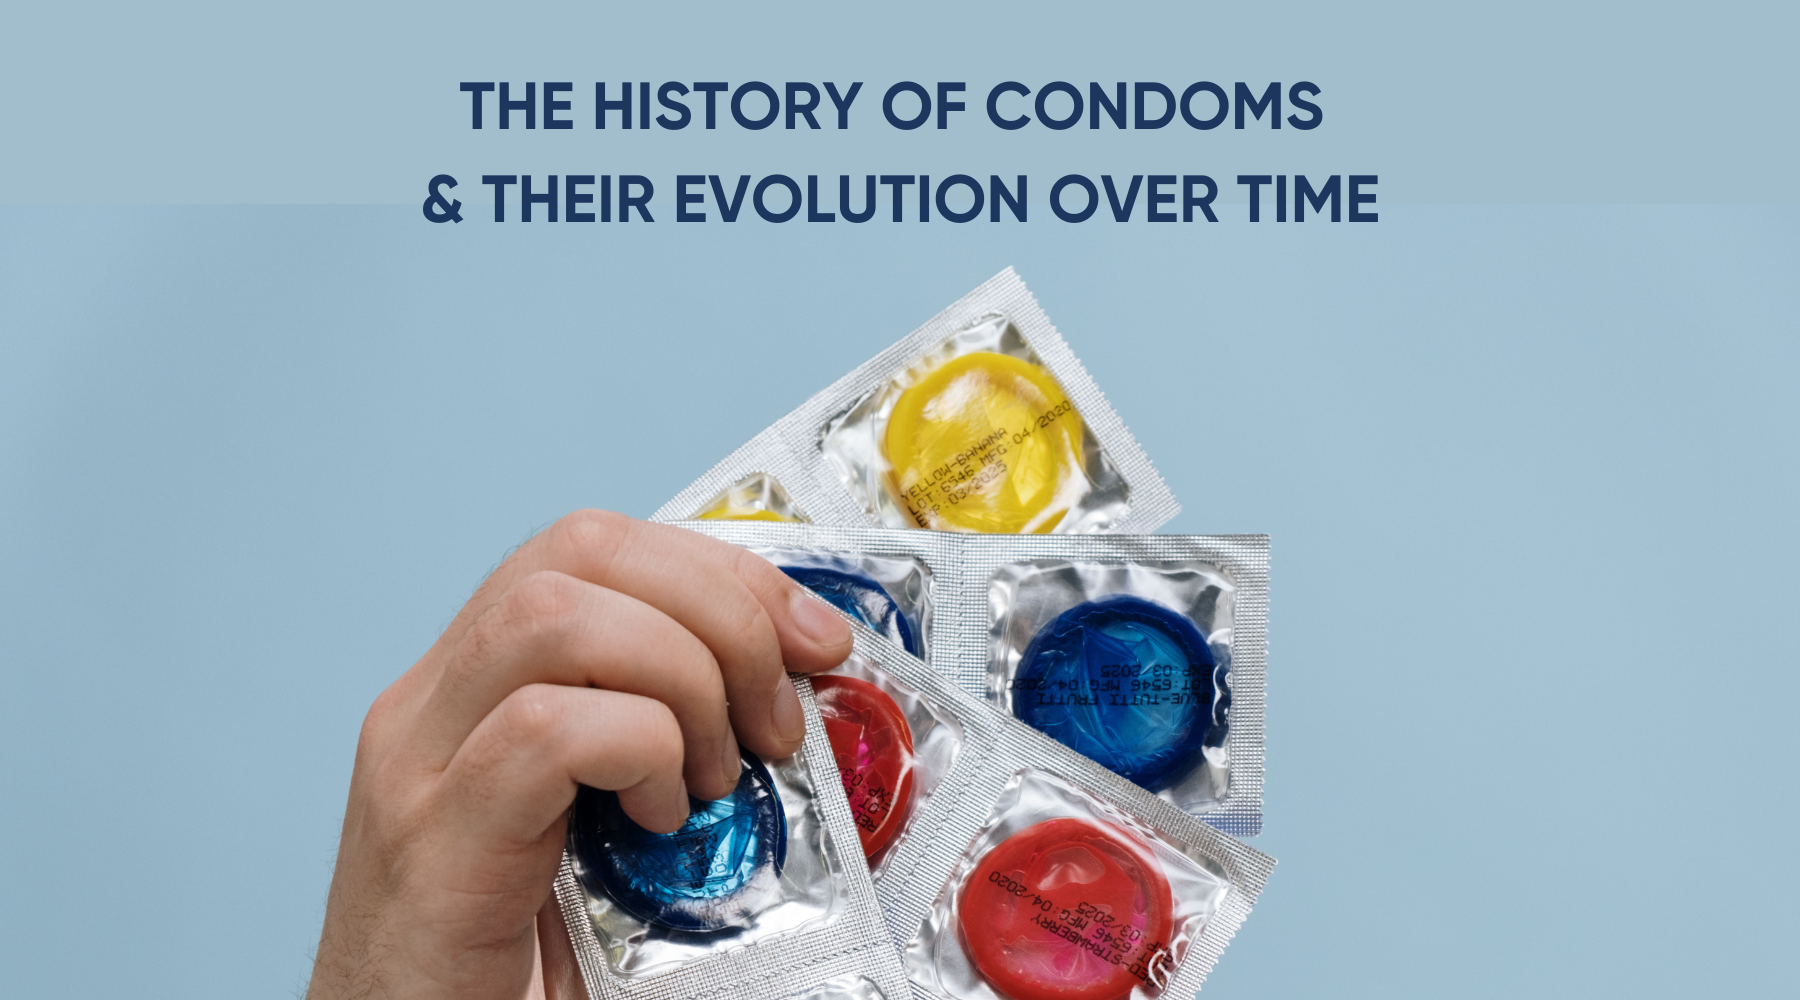 THE HISTORY OF CONDOMS & THEIR EVOLUTION OVER TIME